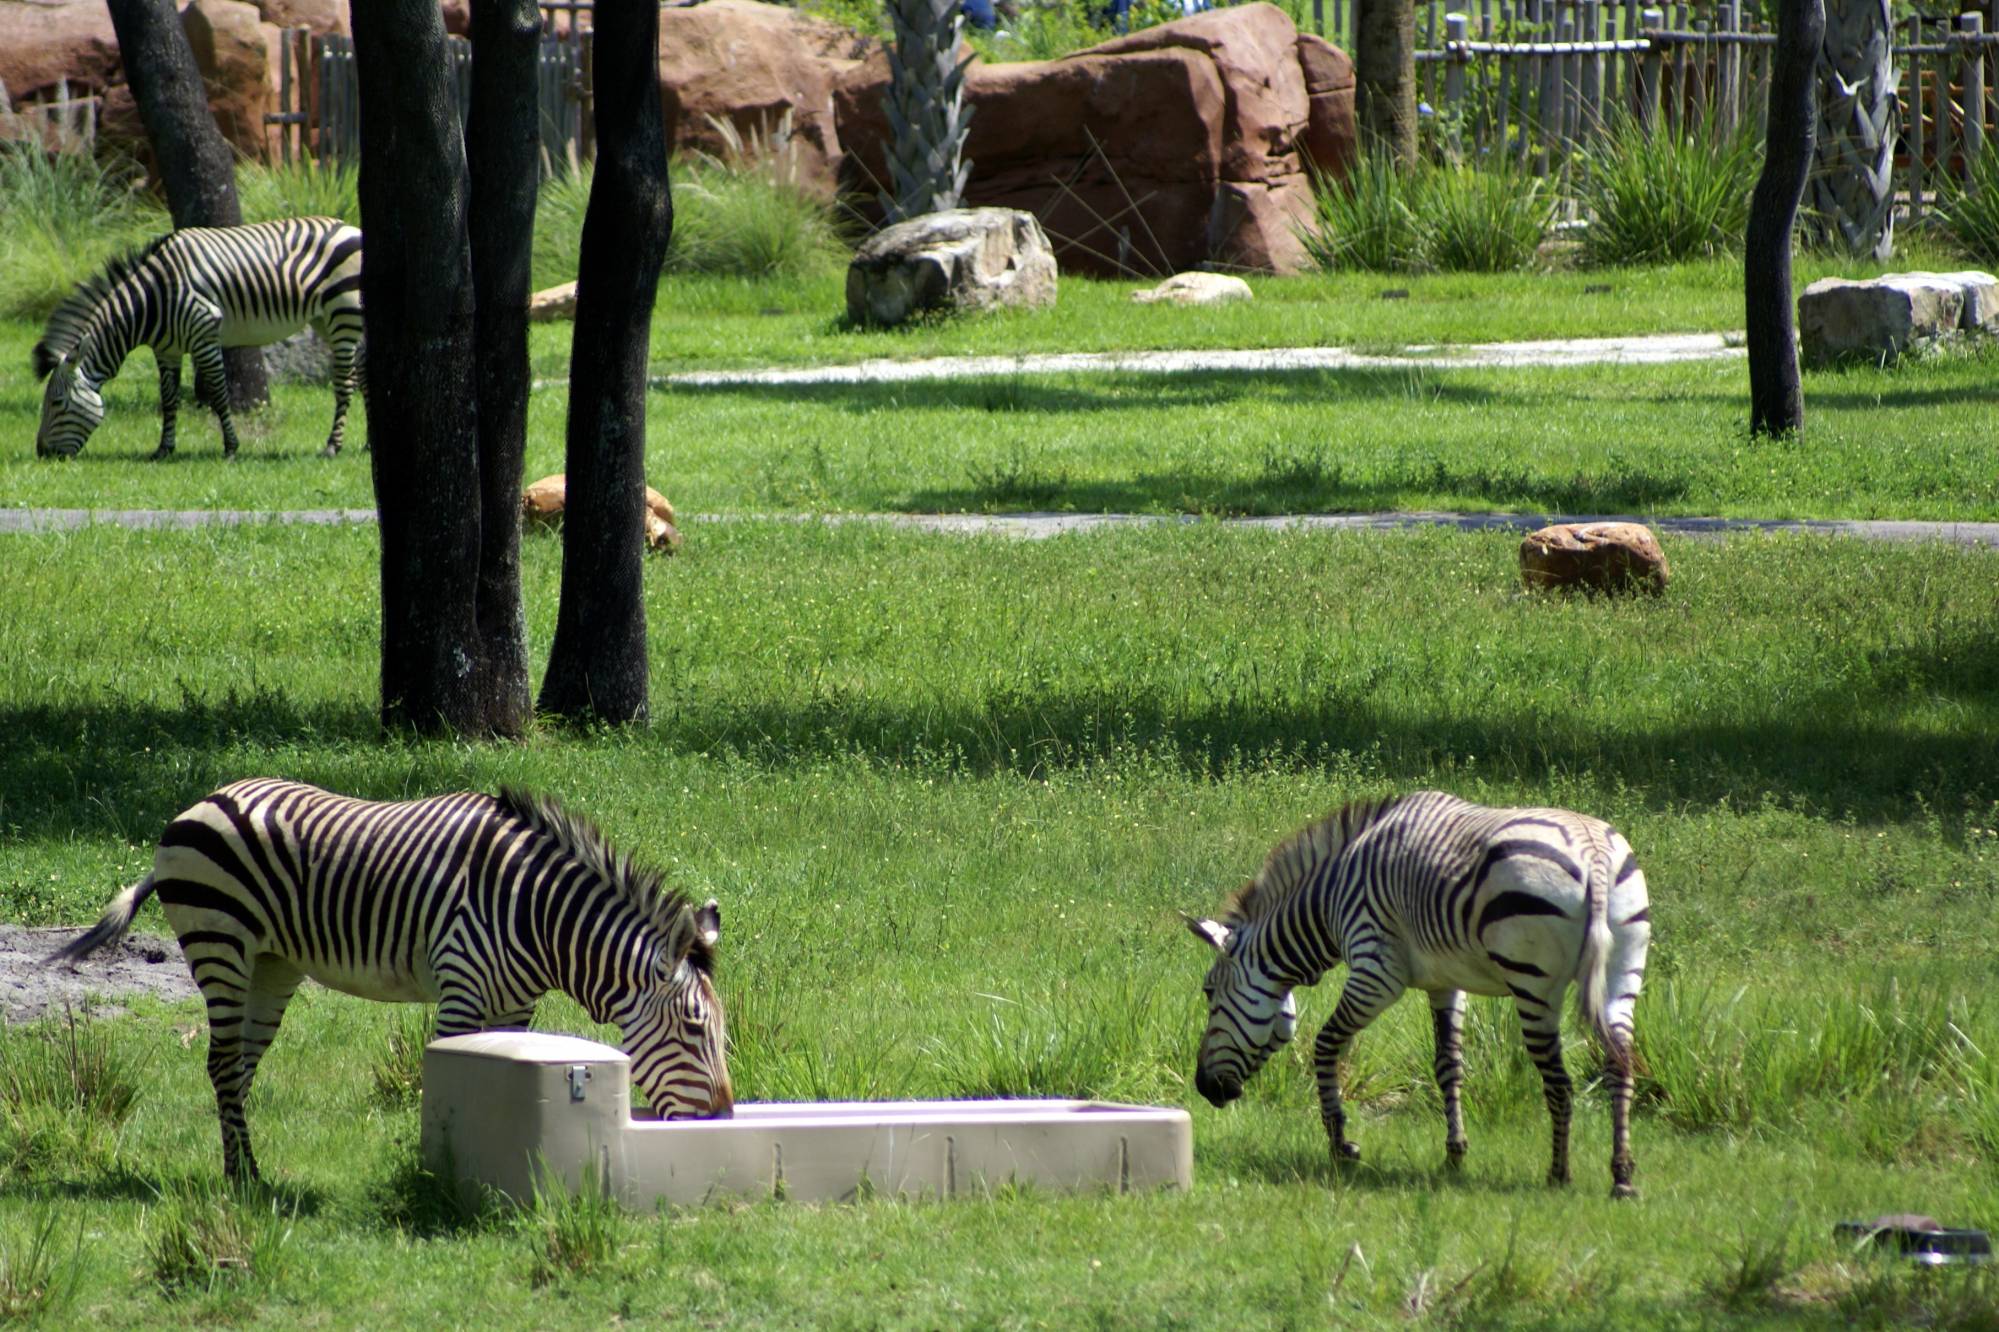 Zebras at Play